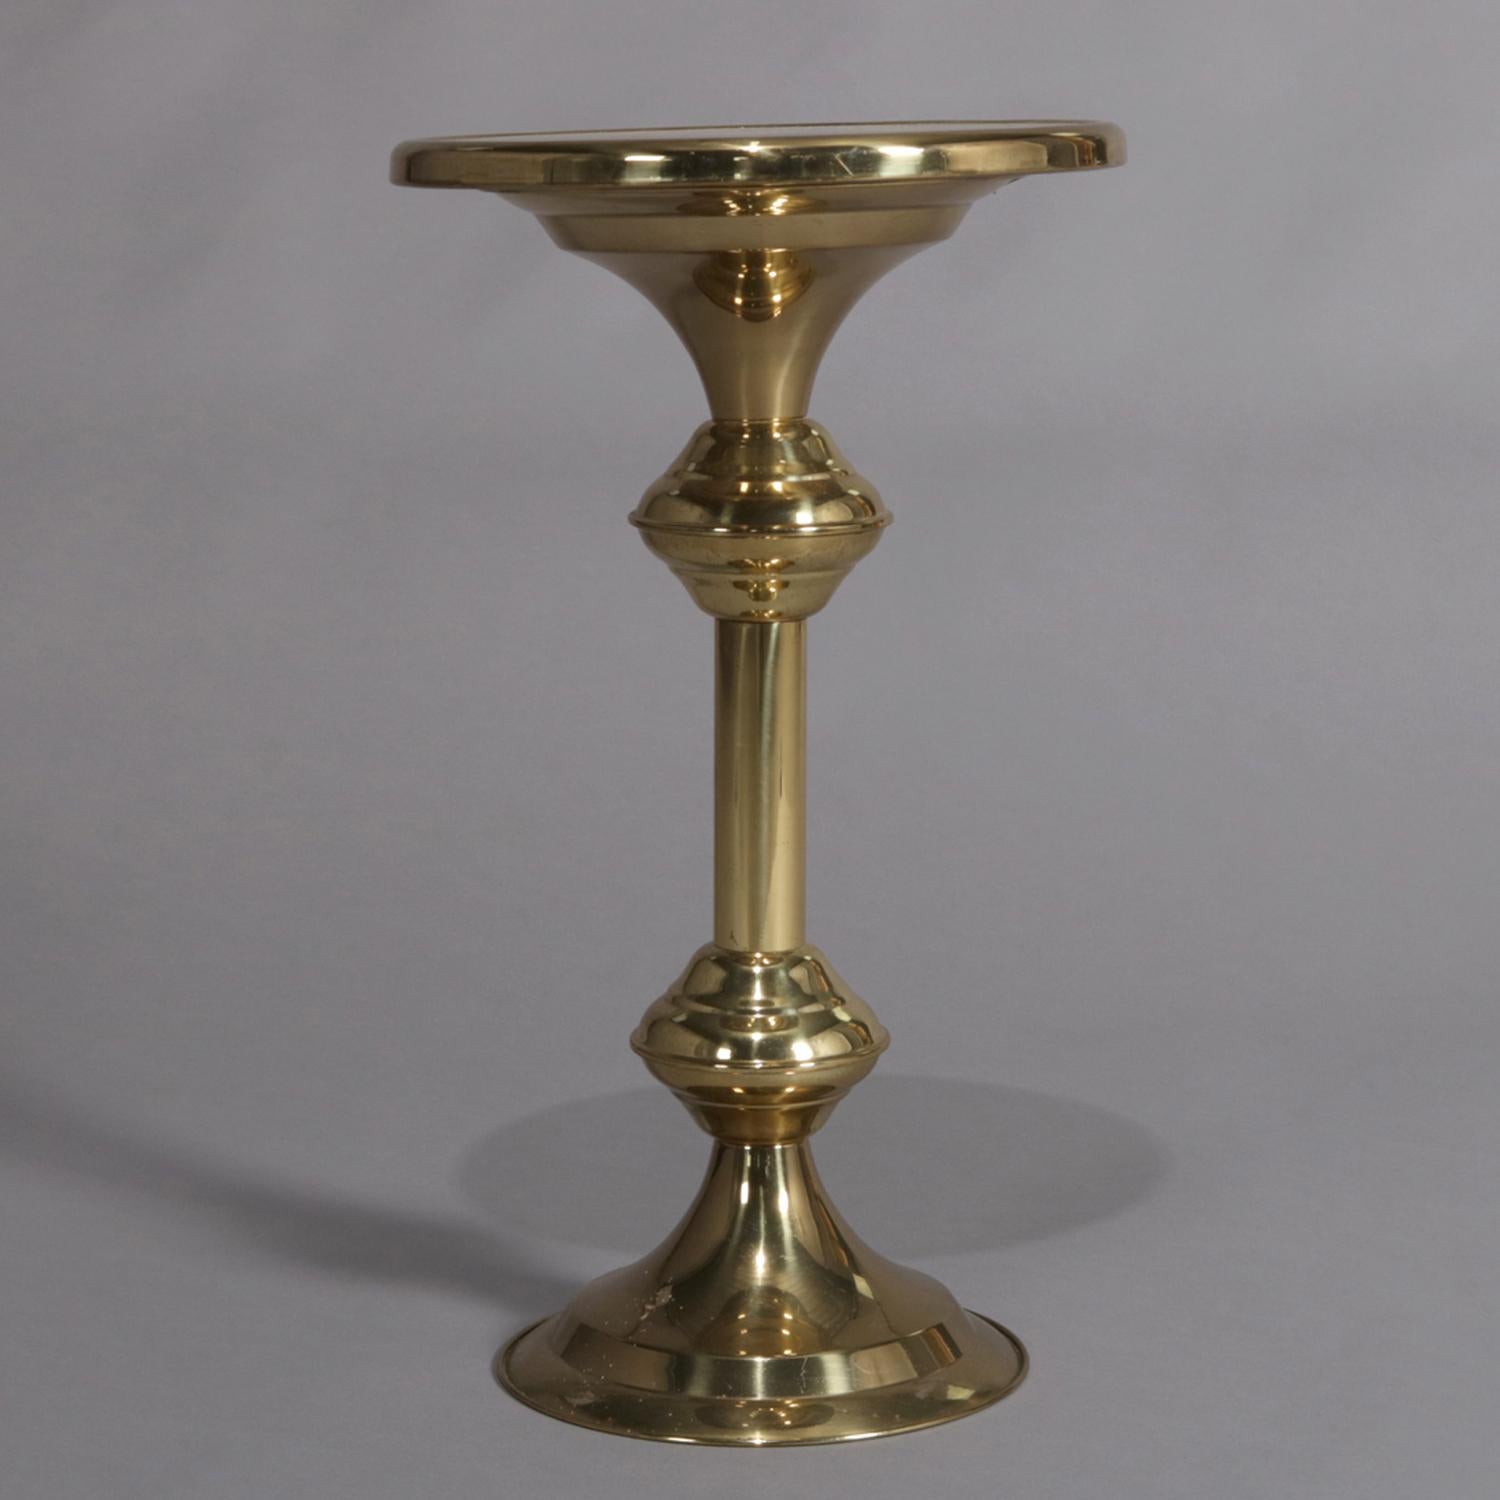 Hollywood Regency side table features brass construction with round dish top display over turned column and seated on stepped and flared weighted base, 